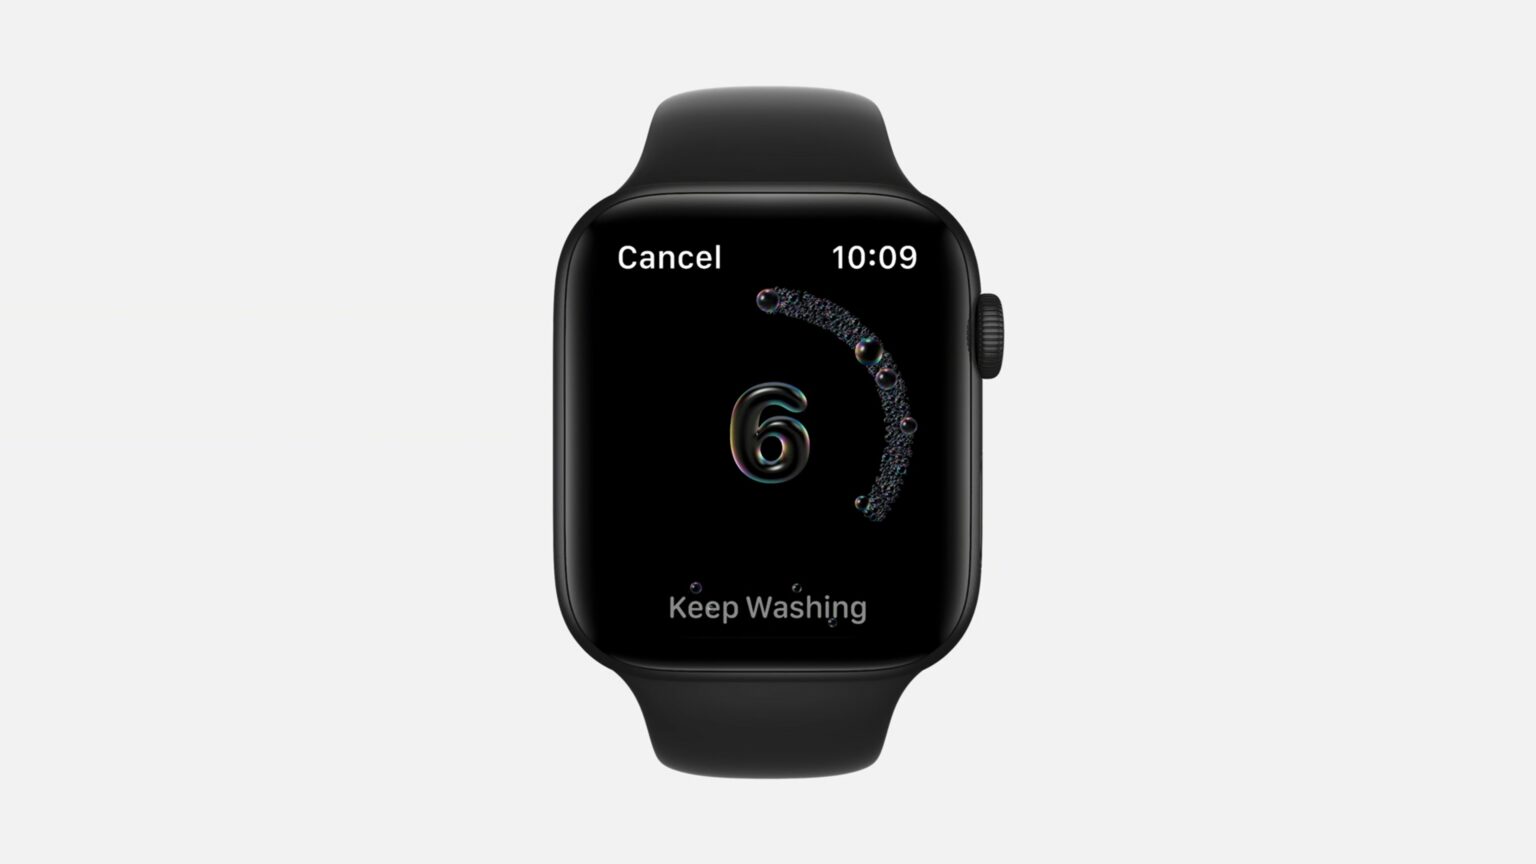 With watchOS 7, you're just a couple quick toggles away from maximum handwashing effectiveness.